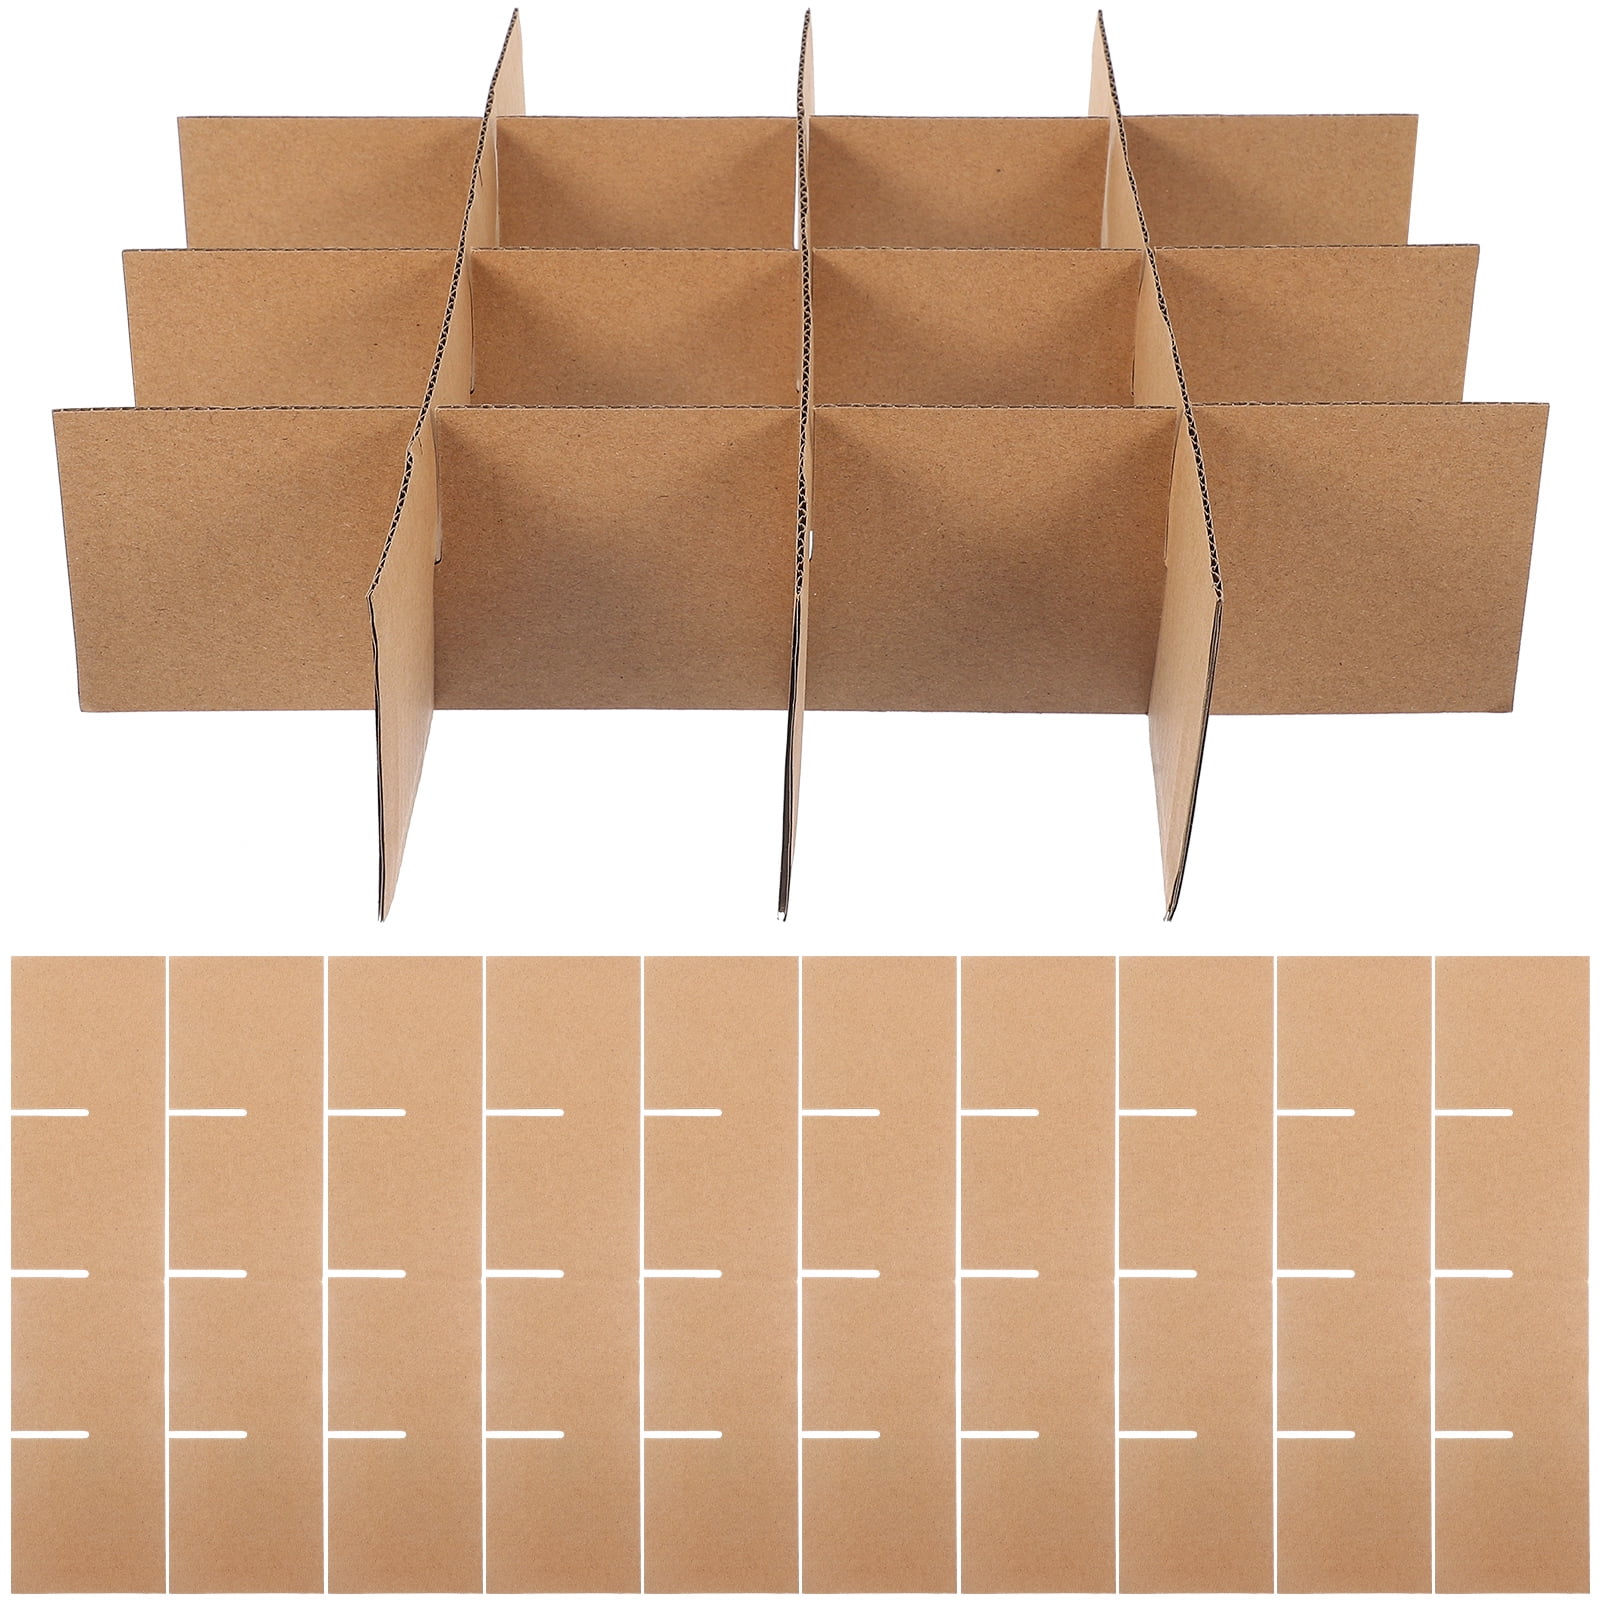 6 Pcs Cardboard Dividers for Boxes Divider for Packing Boxes Cardboard Boxes  Divider Shipping Carton Dividers Cell Wine Glass Paper 